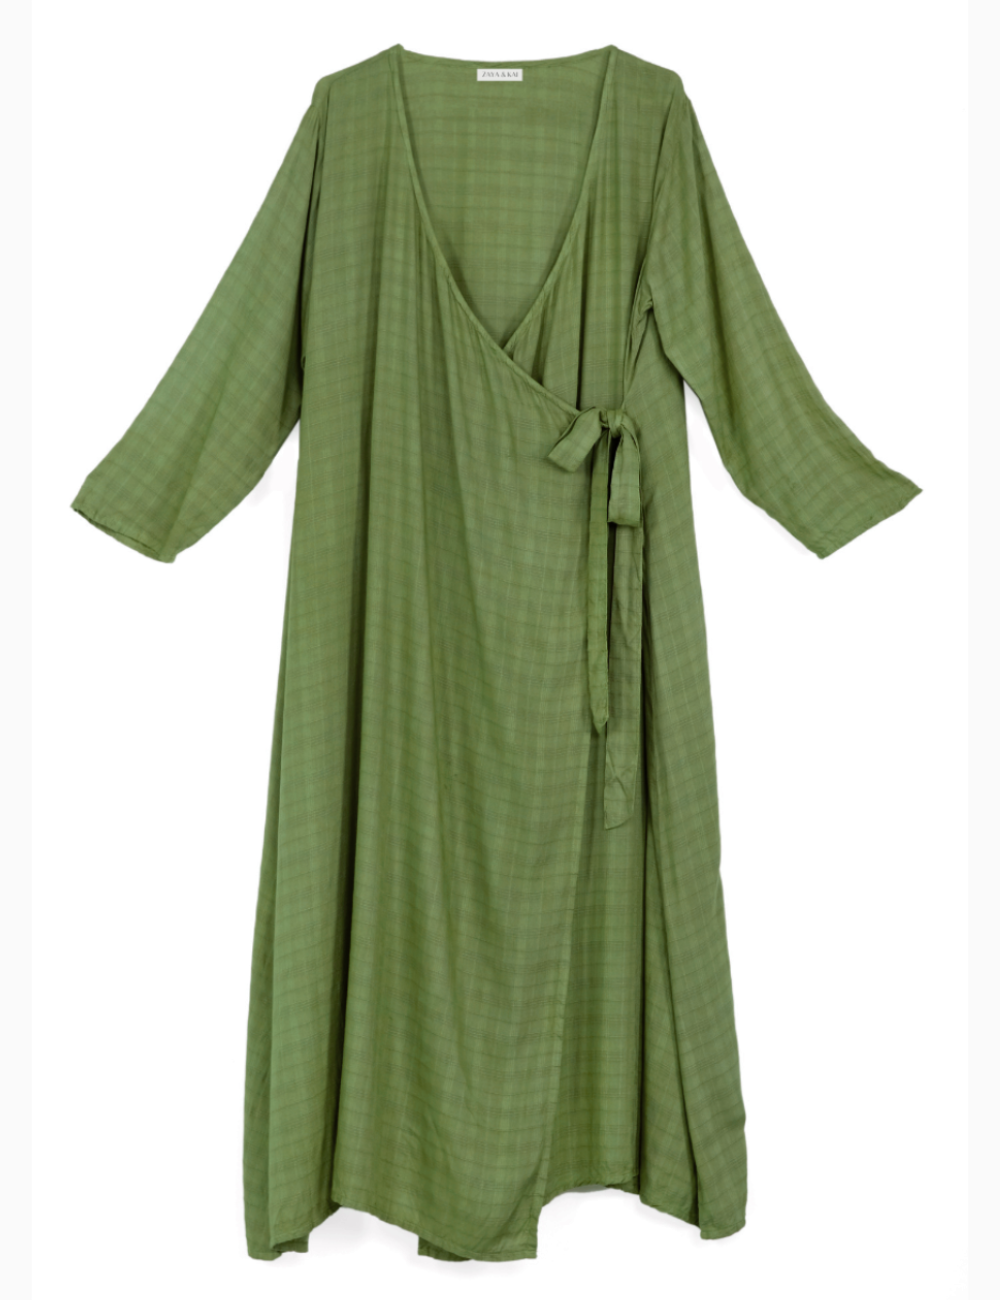 product photo of santo organic sugarcane wrap dress in forest green colour in front of a white background